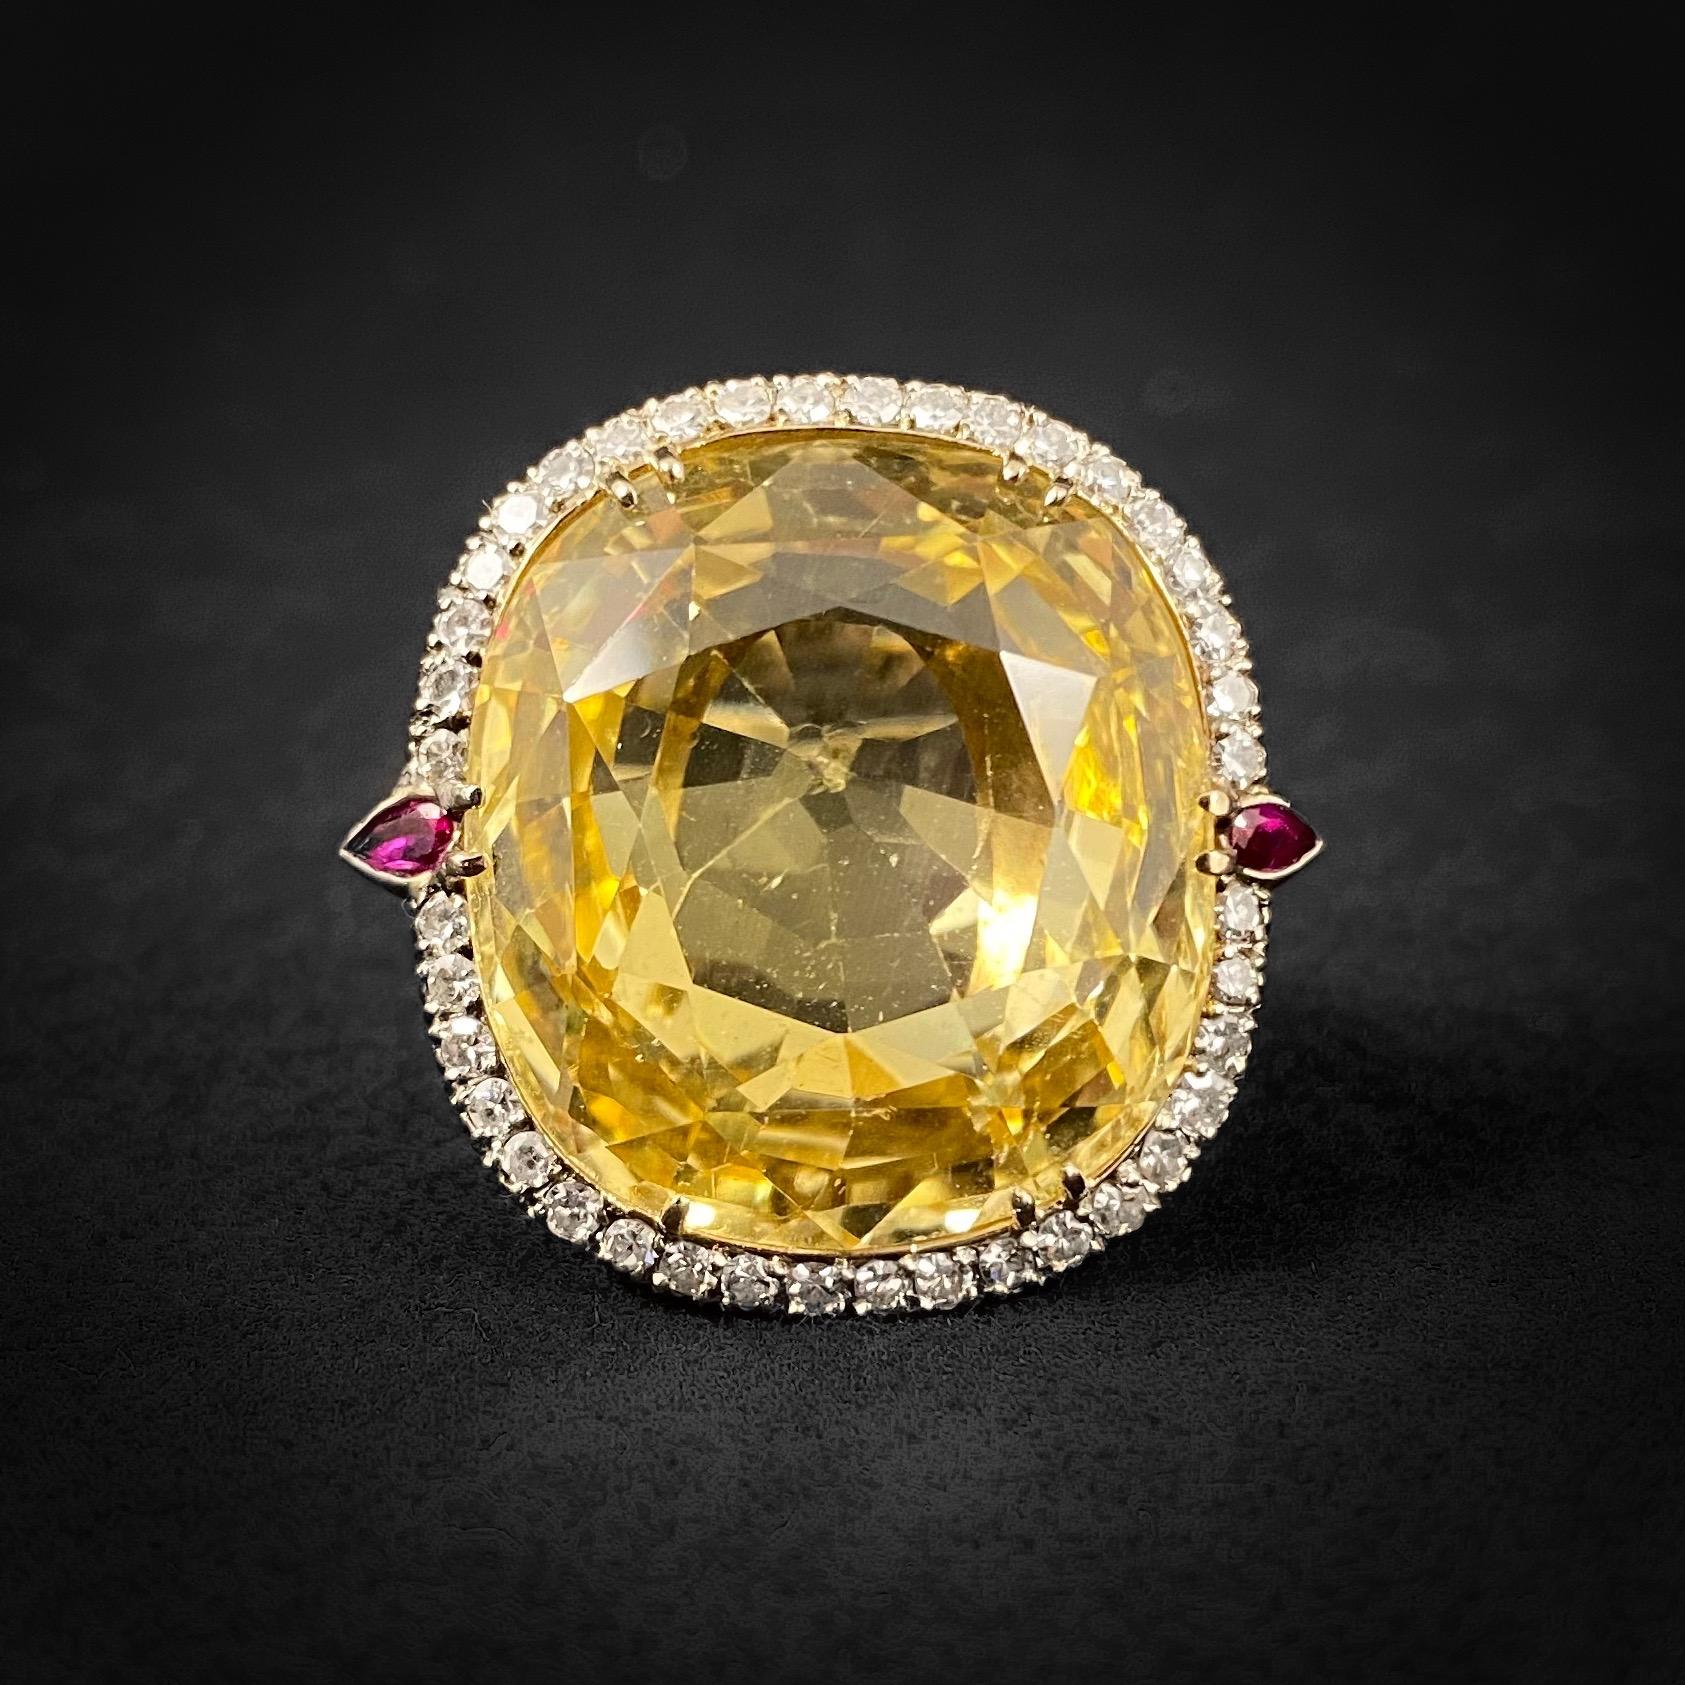 Certified 40-carat natural unheated Ceylon (Sri Lankan) yellow sapphire, ruby and diamond cluster cocktail ring in 14kt yellow gold. Made in an unusual warm alloy that is in between yellow and white gold, this vintage jewel features a rare cushion